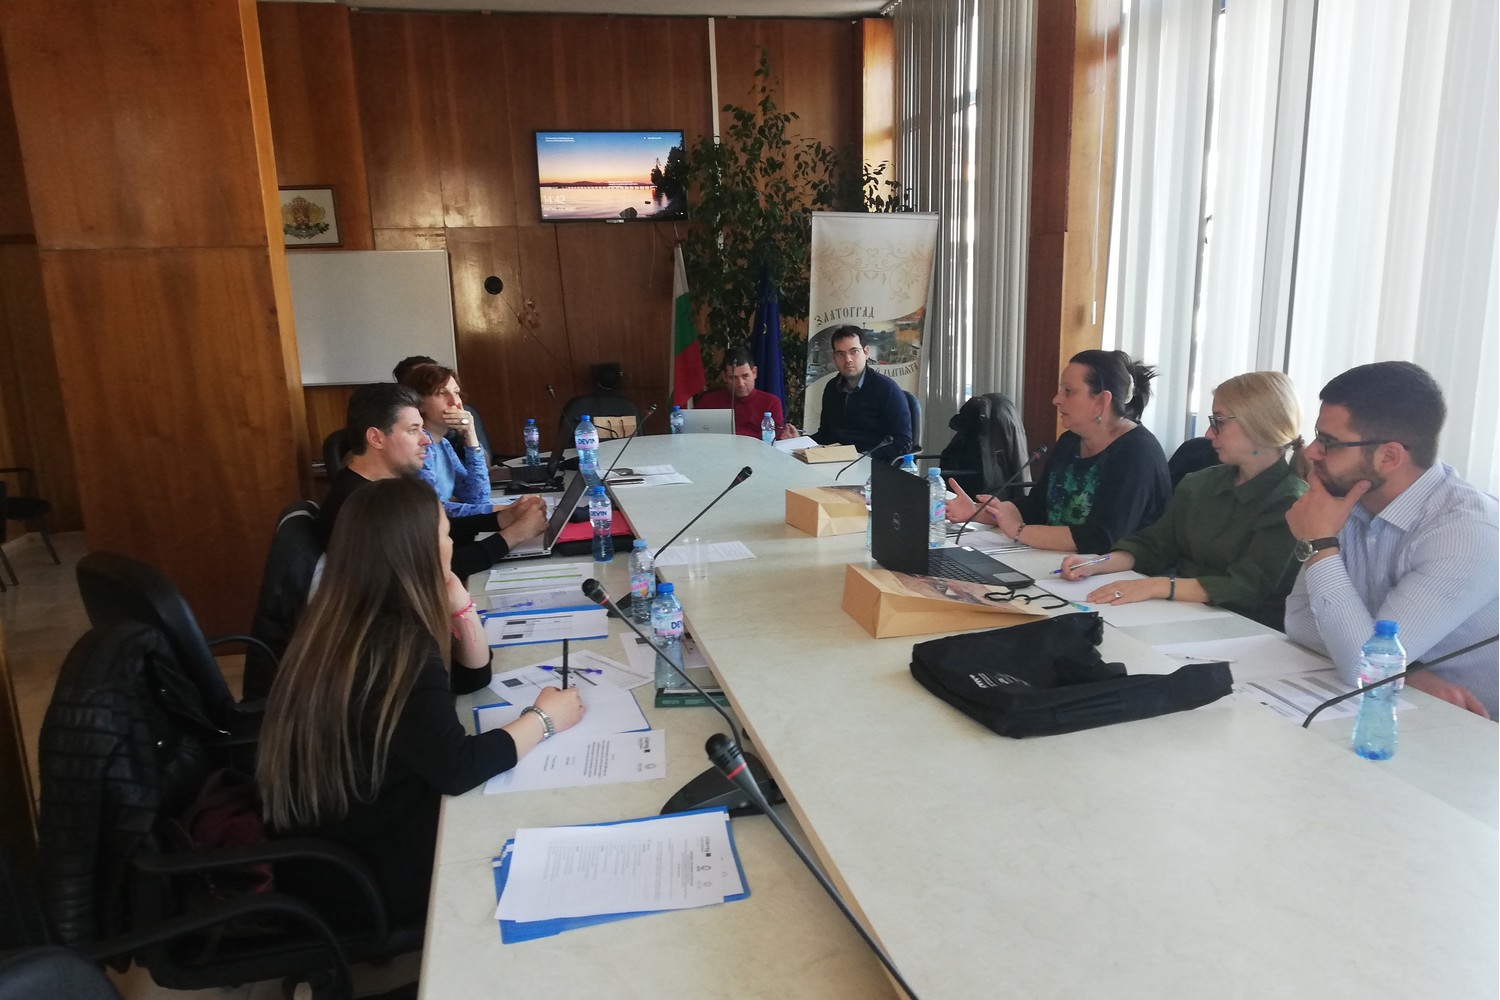 2nd INTERIM MEETING ON THE PROJECT eOUTLAND